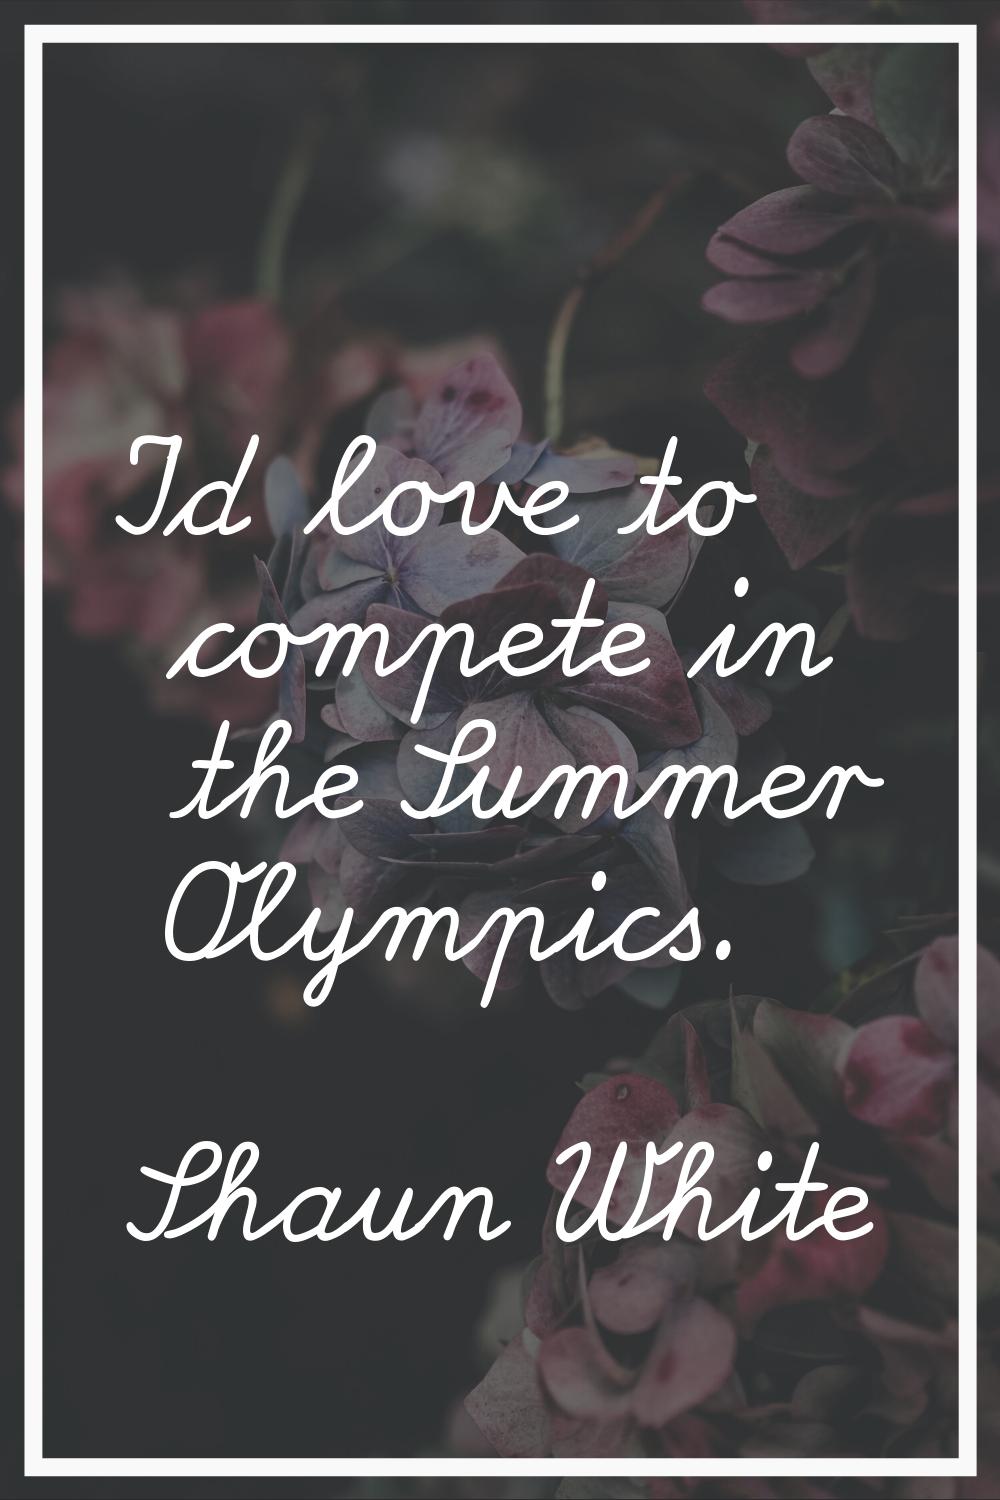 I'd love to compete in the Summer Olympics.